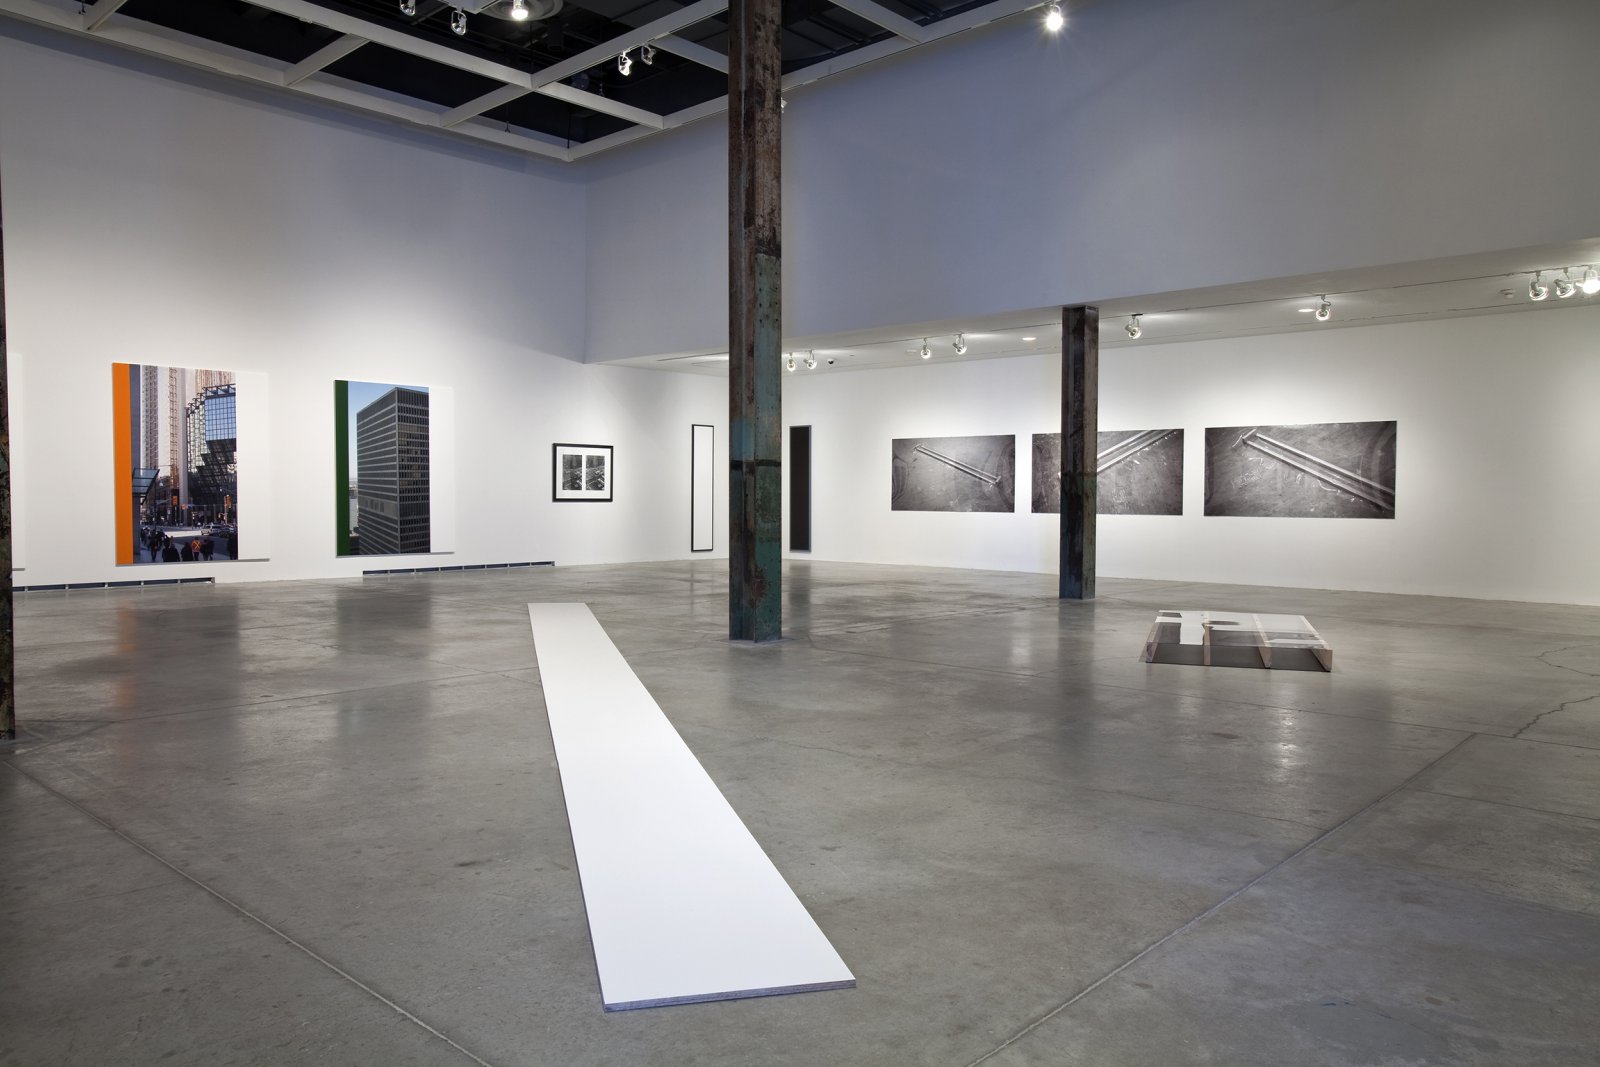 ​Ian Wallace, installation view, ​The Economy of the Image​, The Power Plant, Toronto, 2010​​​​ by Ian Wallace